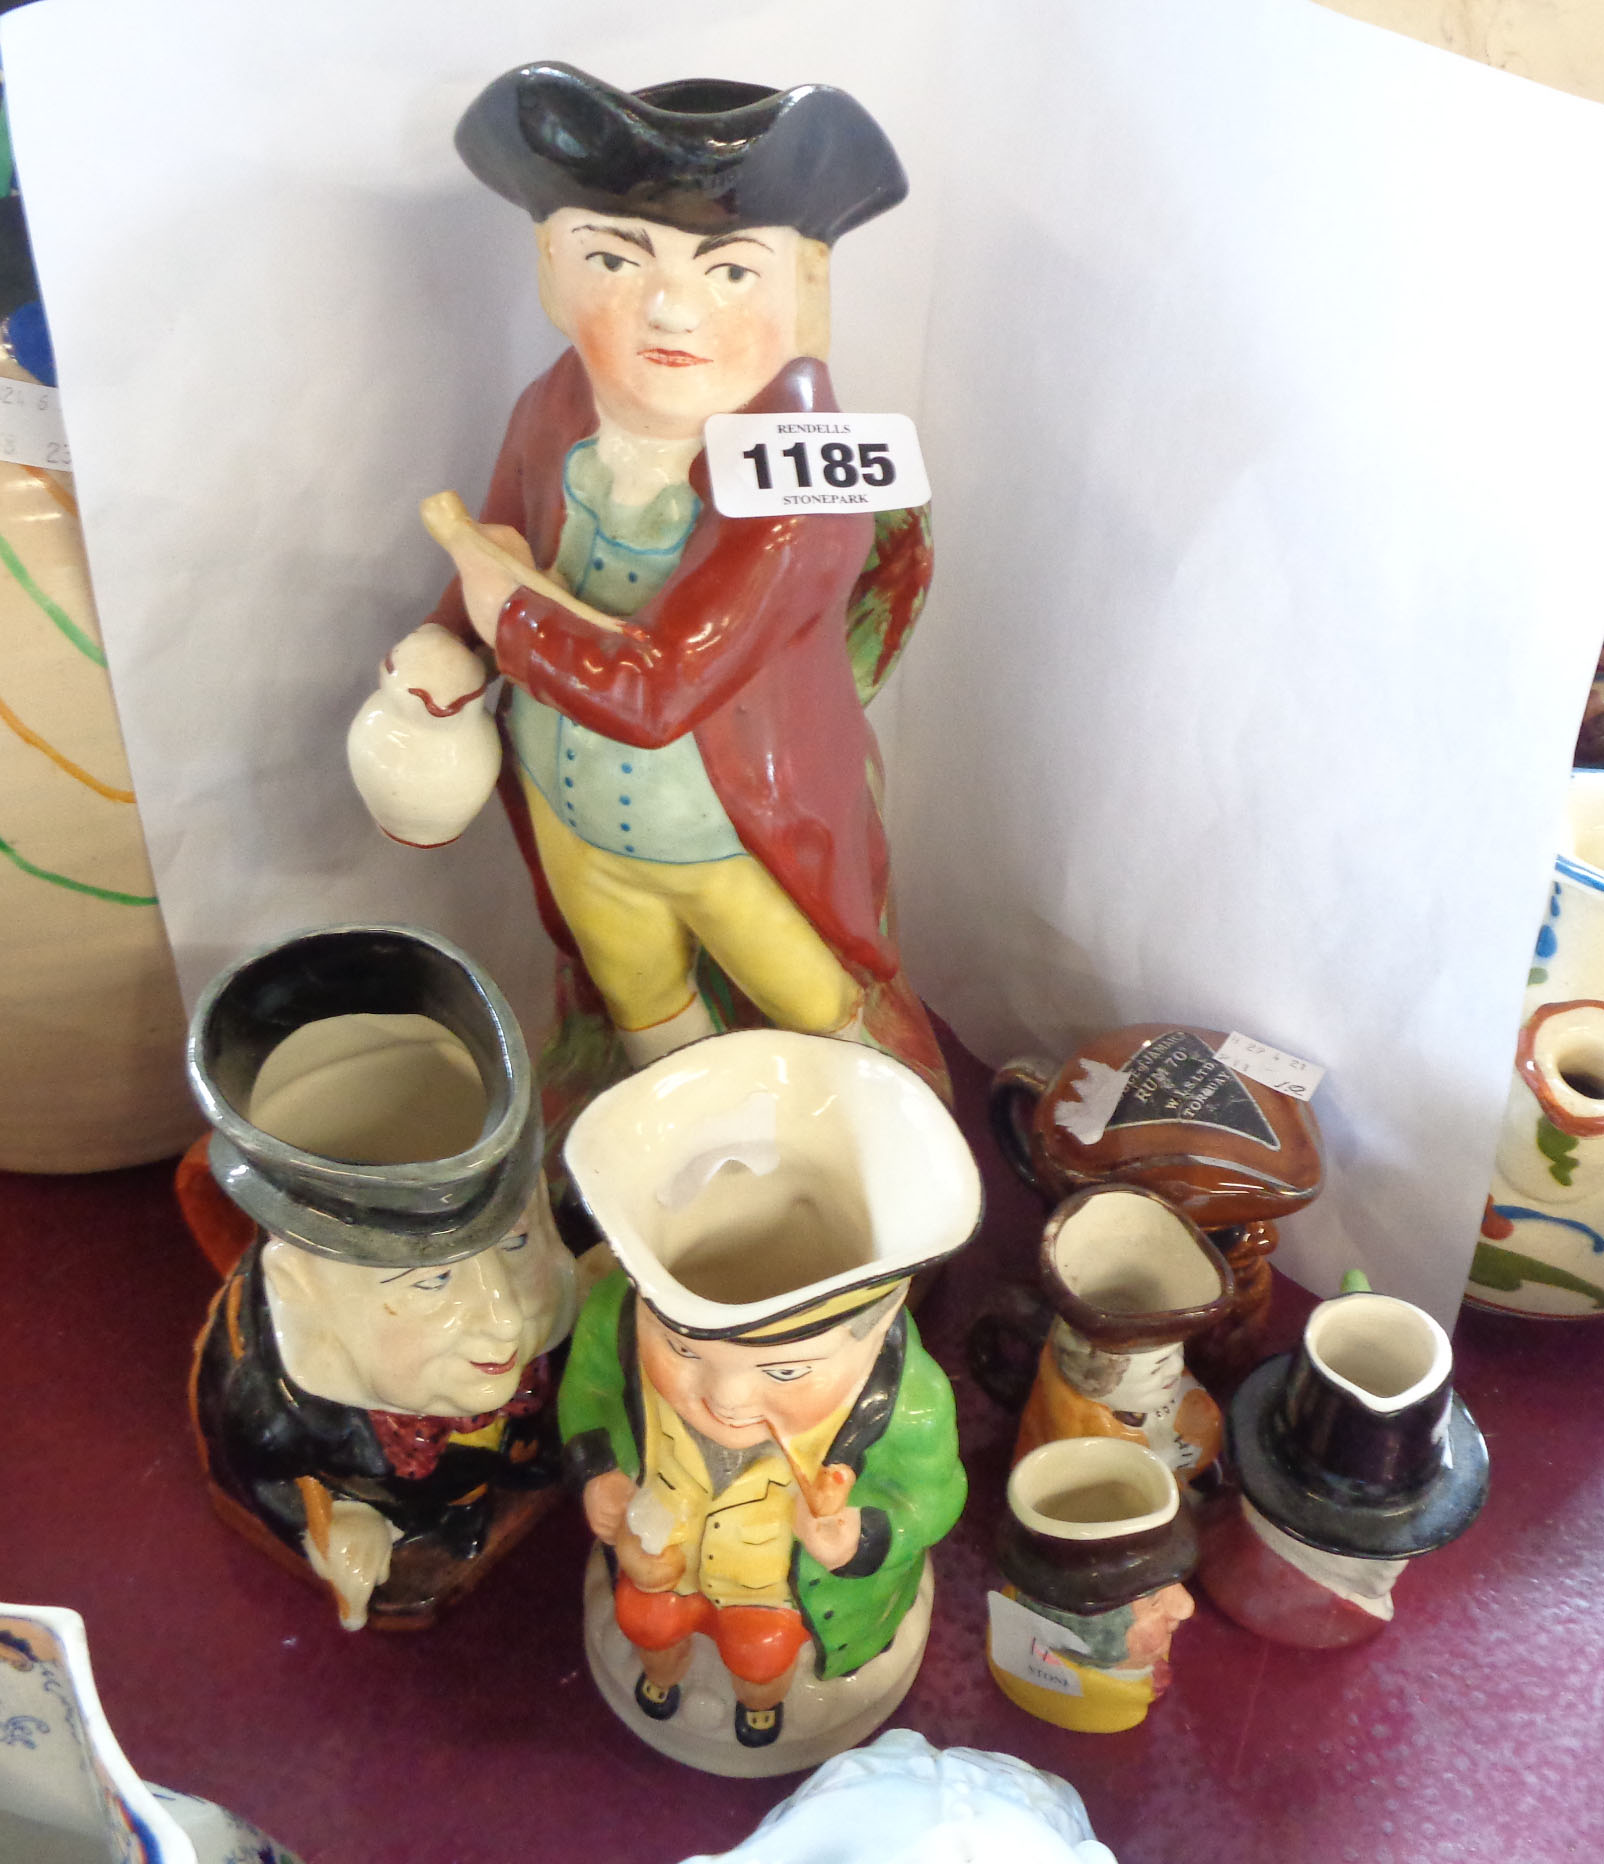 Six Toby and character jugs including Staffordshire, Burleigh ware - sold with a novelty spirit